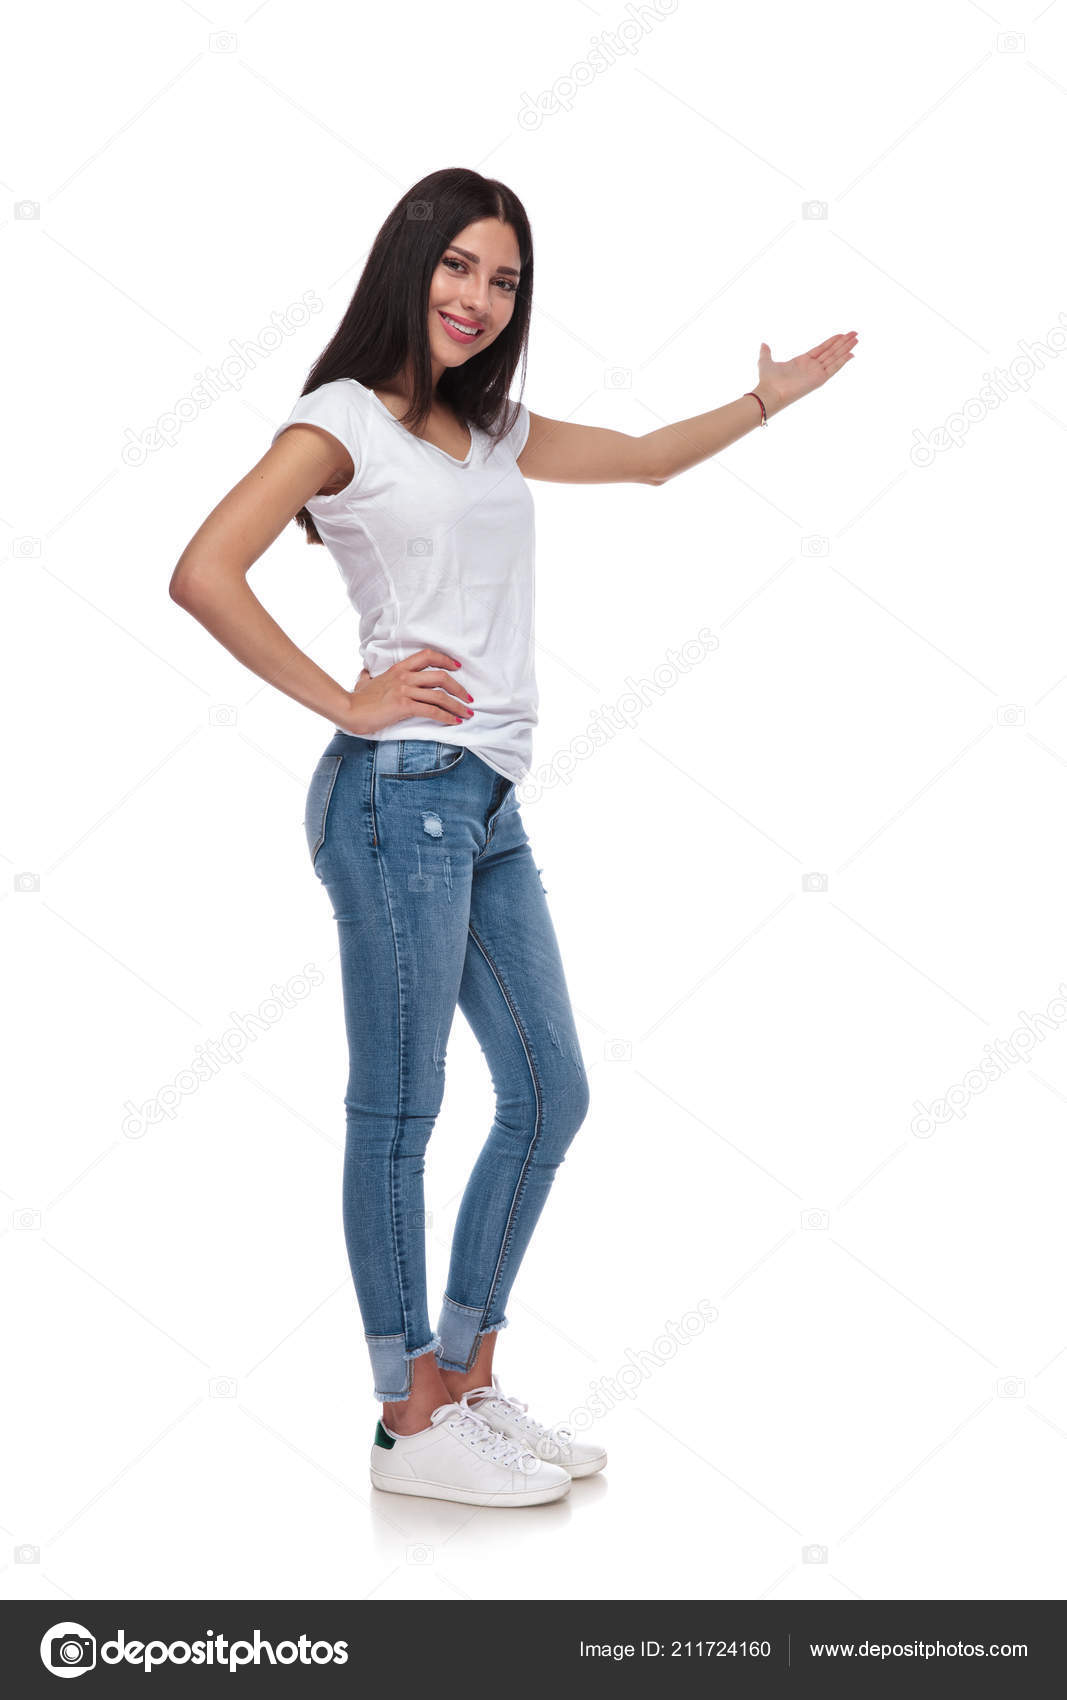 Glad Lady in Casual Jeans Outfit Standing in Confident Pose during